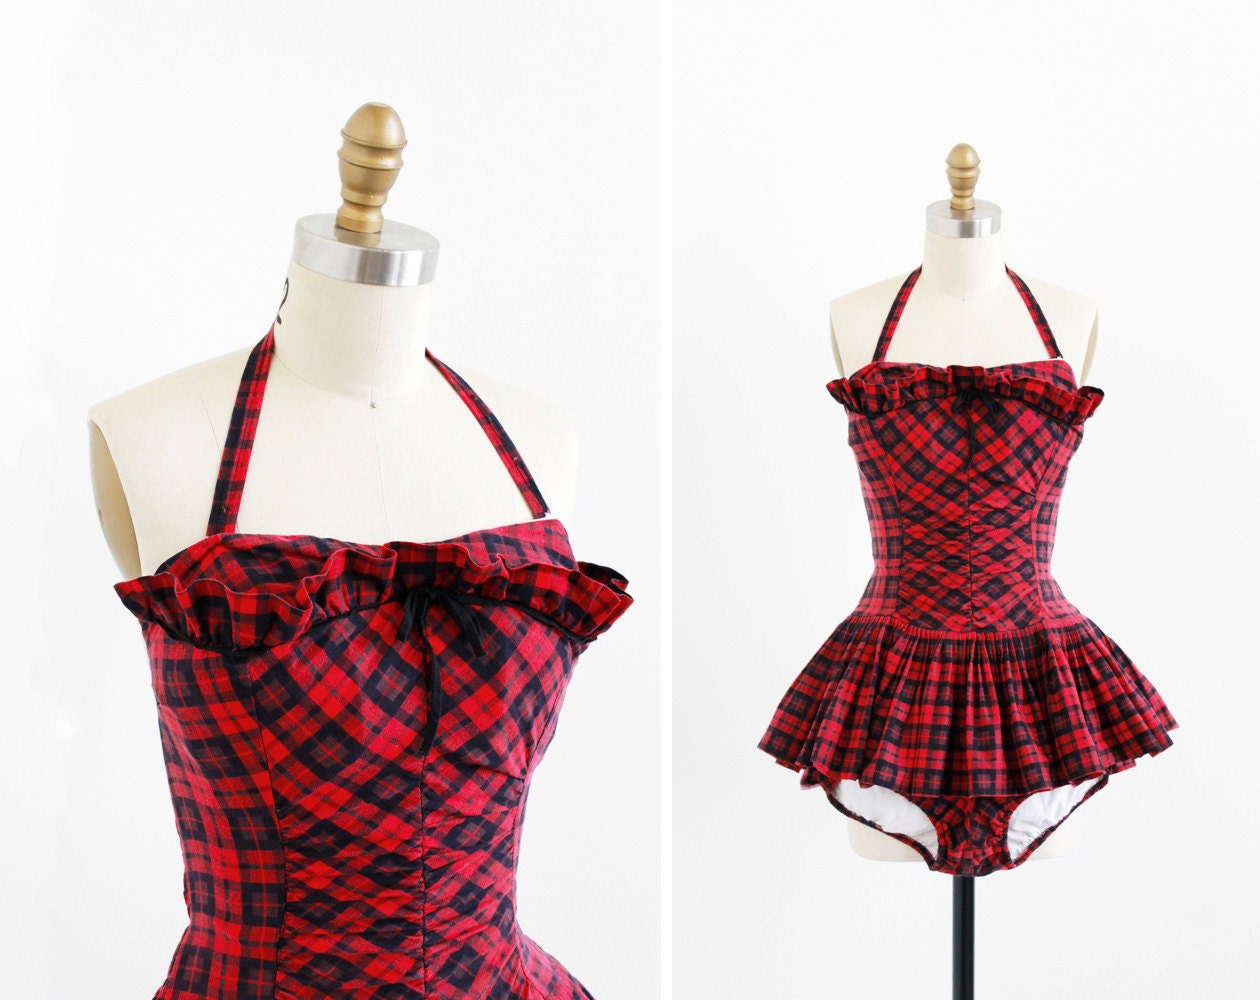 vintage 1950s bathing suit / 50s bathing suit / Red and Black